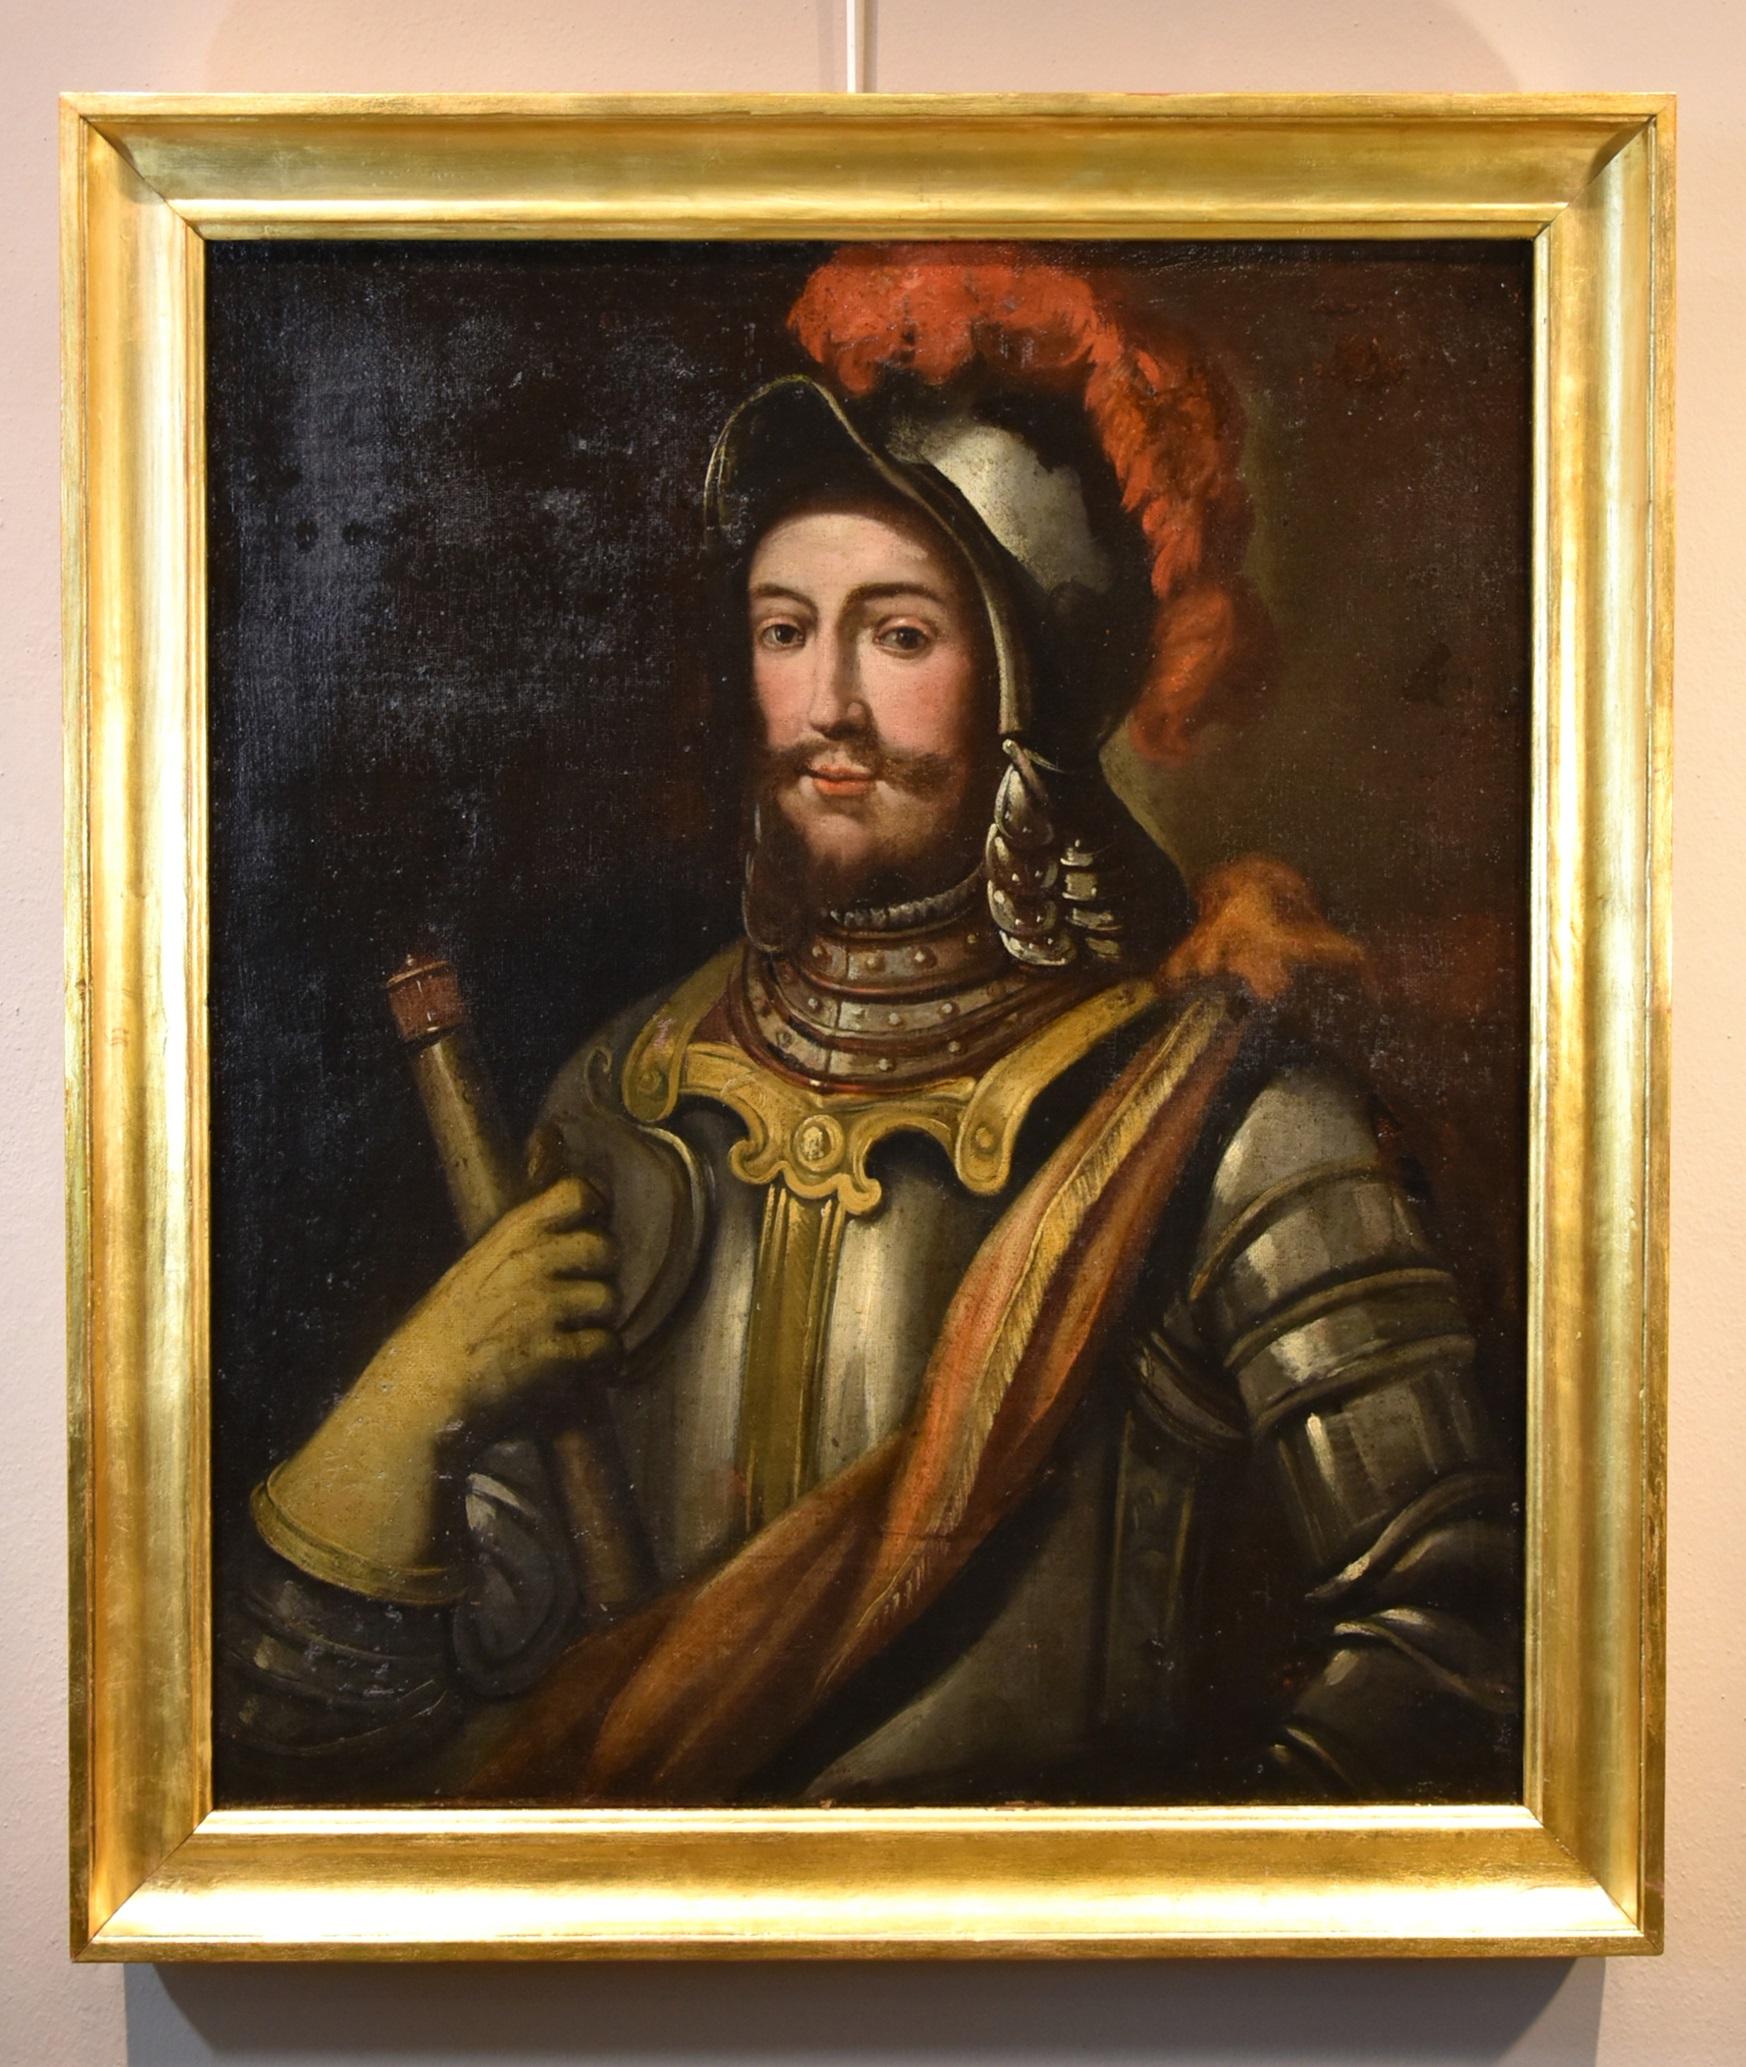 Portrait Knight Paint Oil on canvas 17th Century Lombard school Old master Italy - Painting by Lombard painter of the 17th century